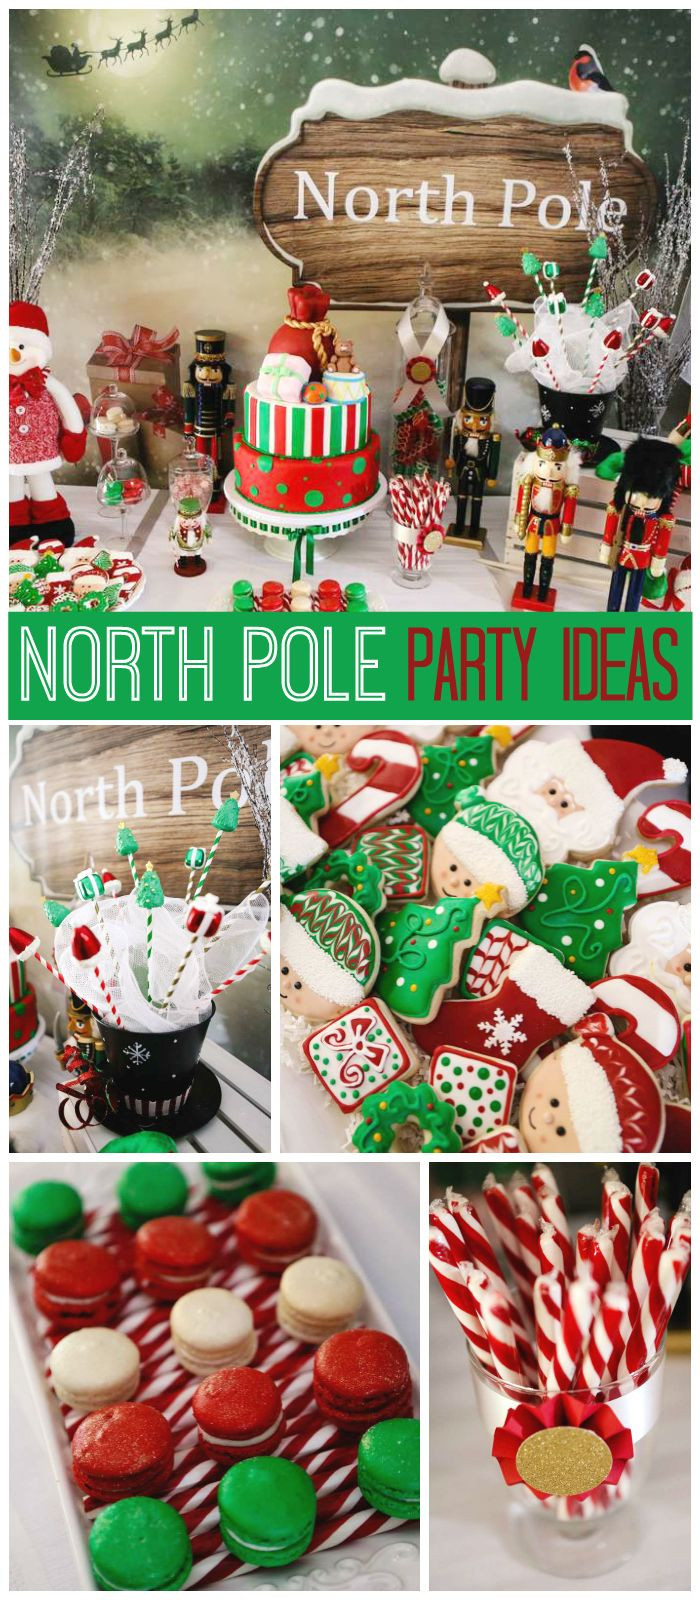 Christmas Theme Party Ideas
 25 best ideas about Christmas Party Themes on Pinterest